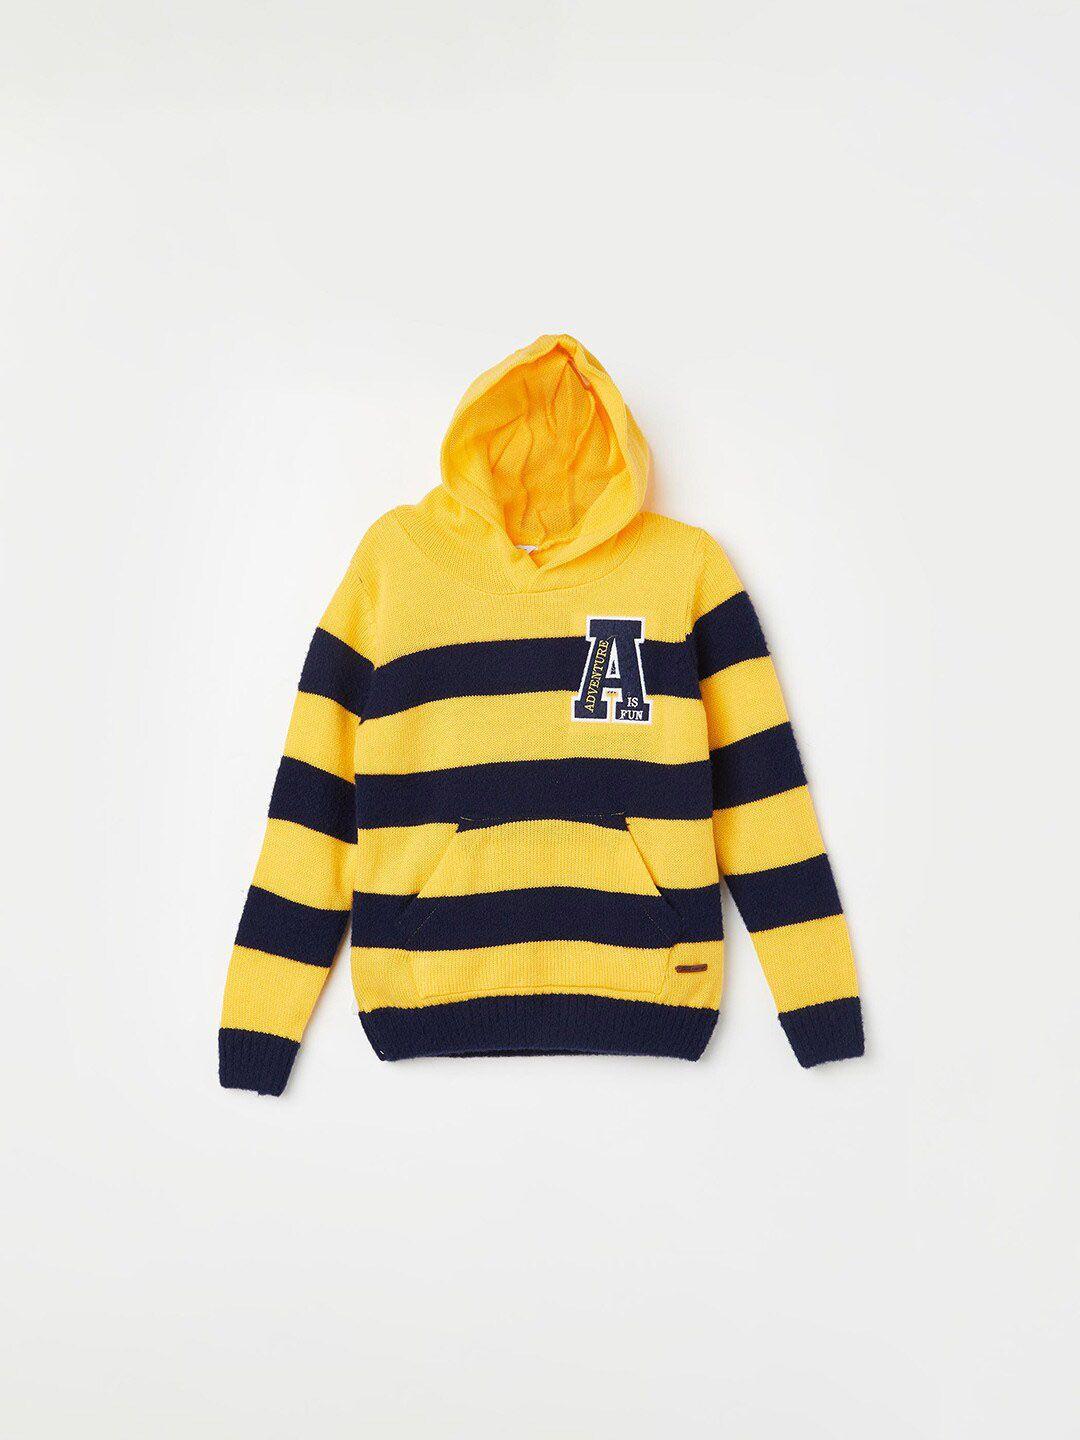 fame-forever-by-lifestyle-boys-yellow-long-sleeves-fashion